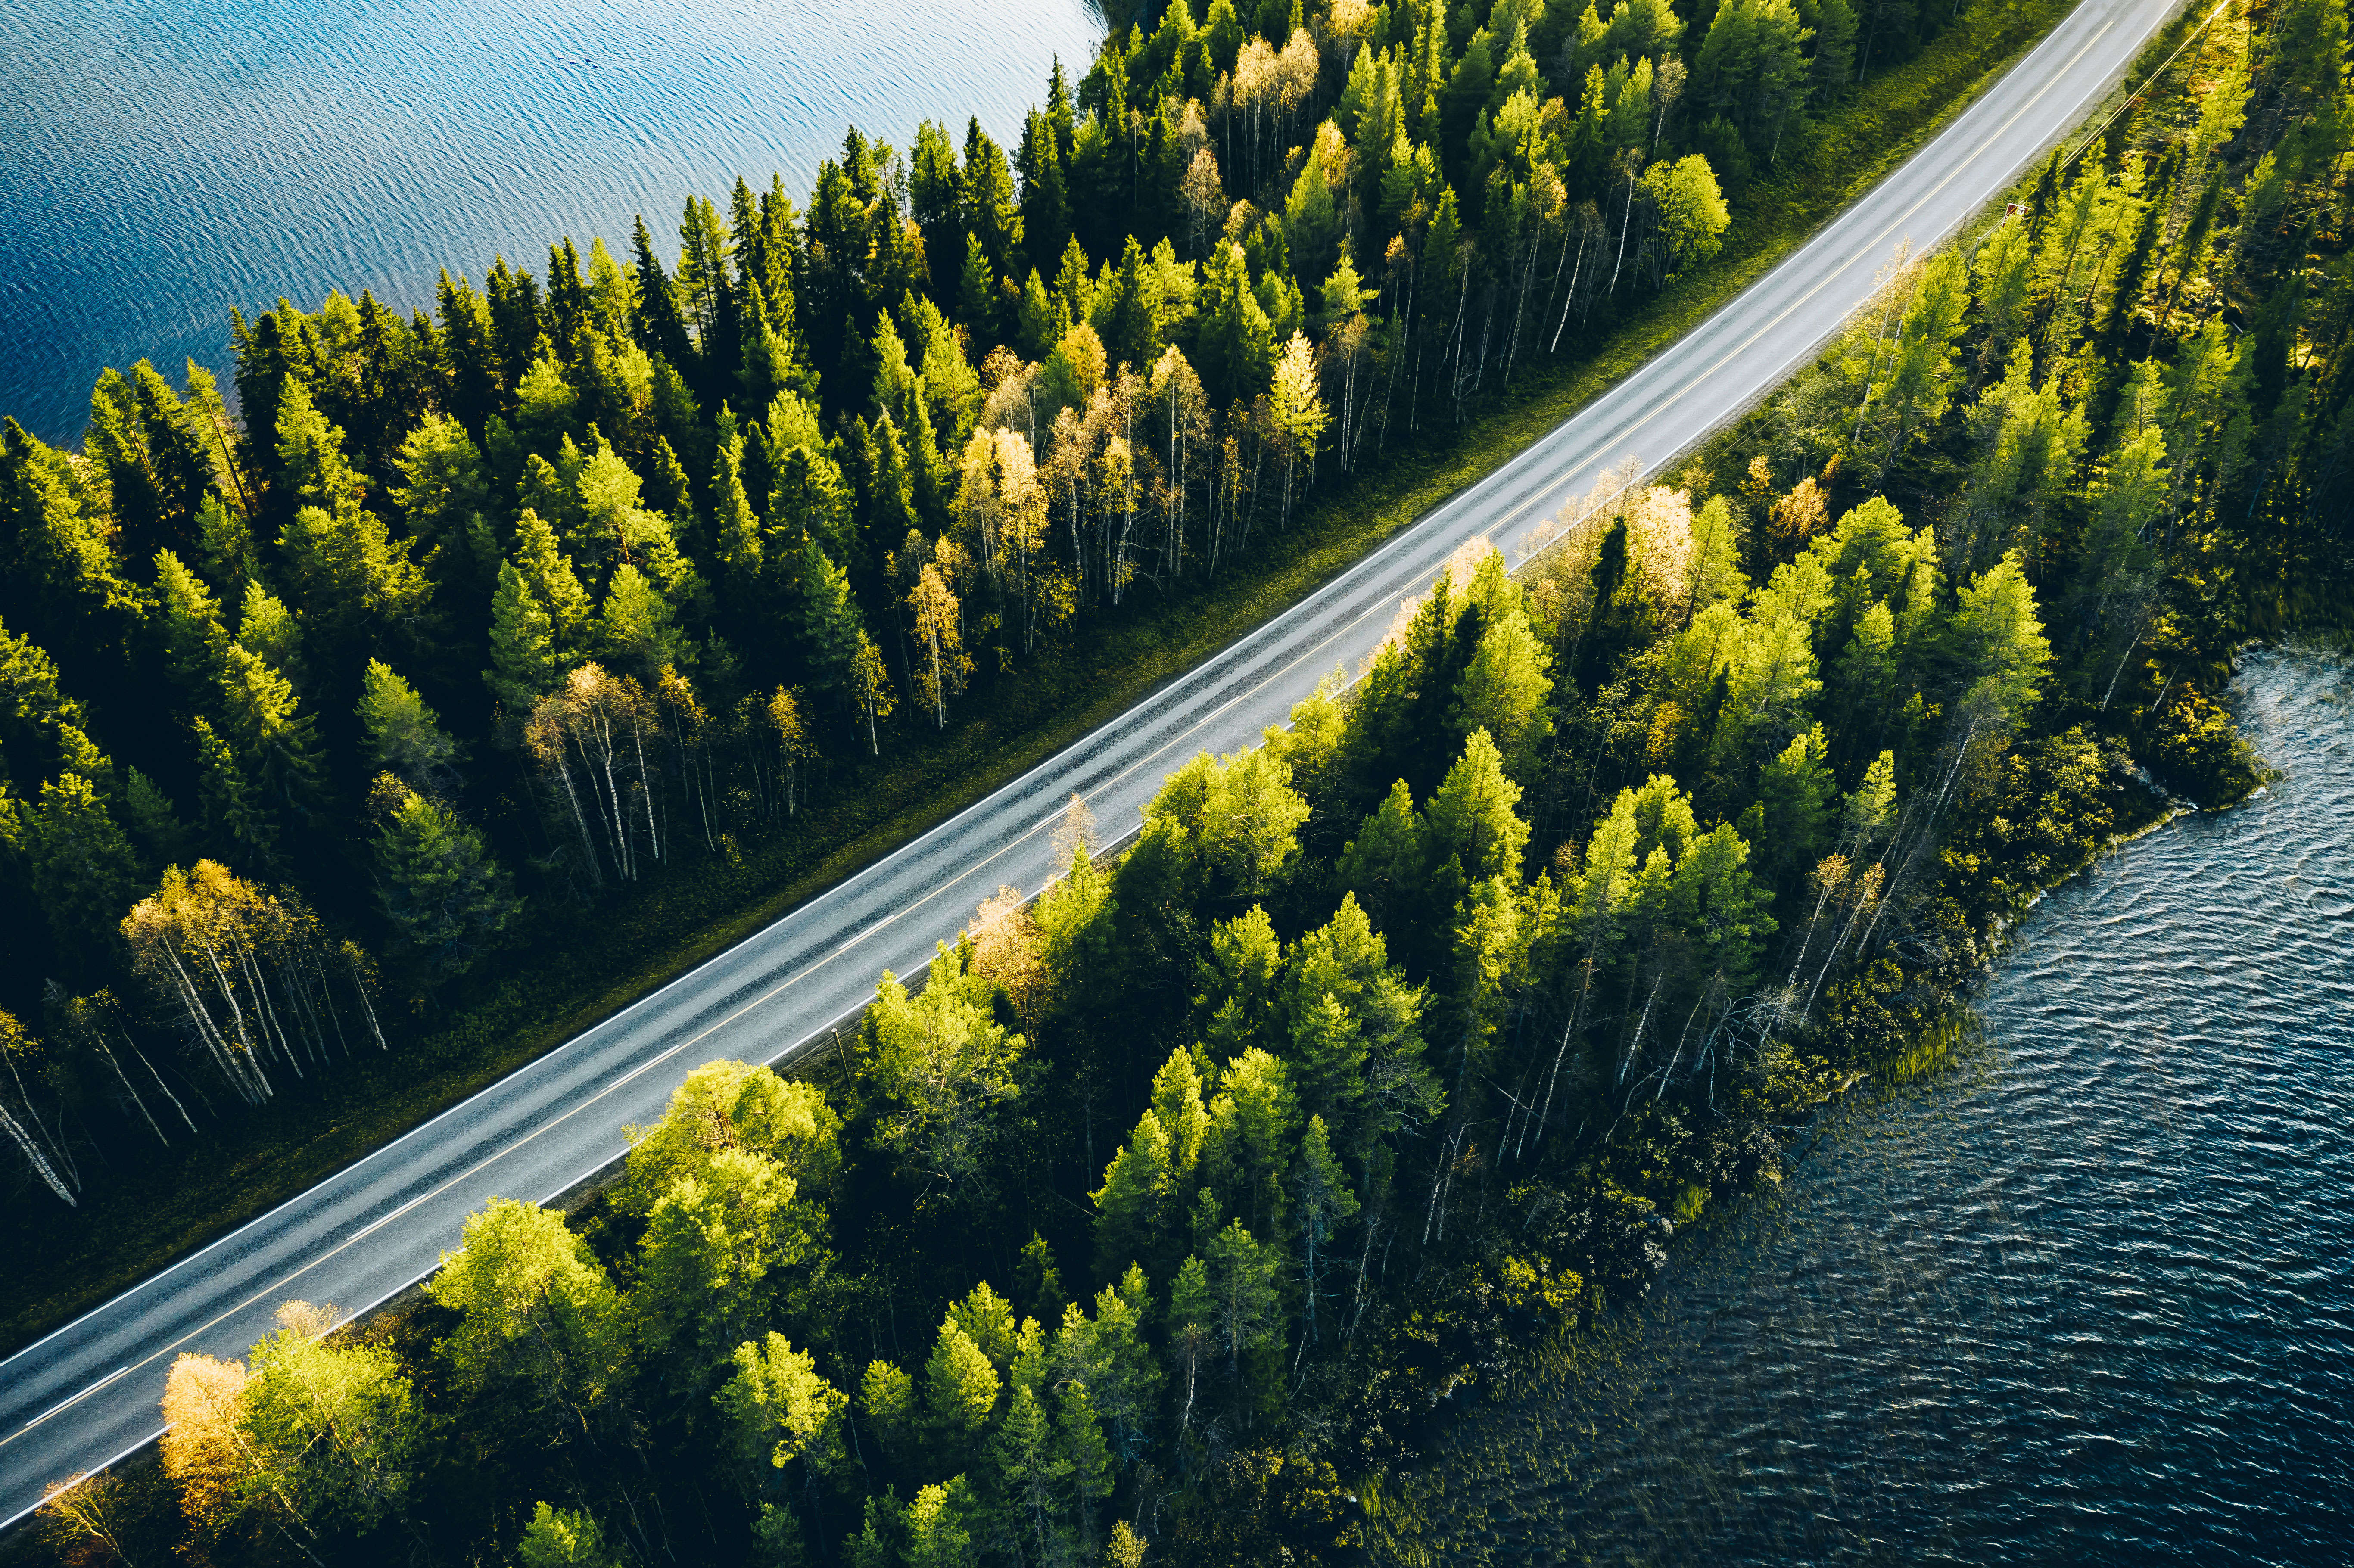 A road-trip around rural Finland is an unforgettable experience